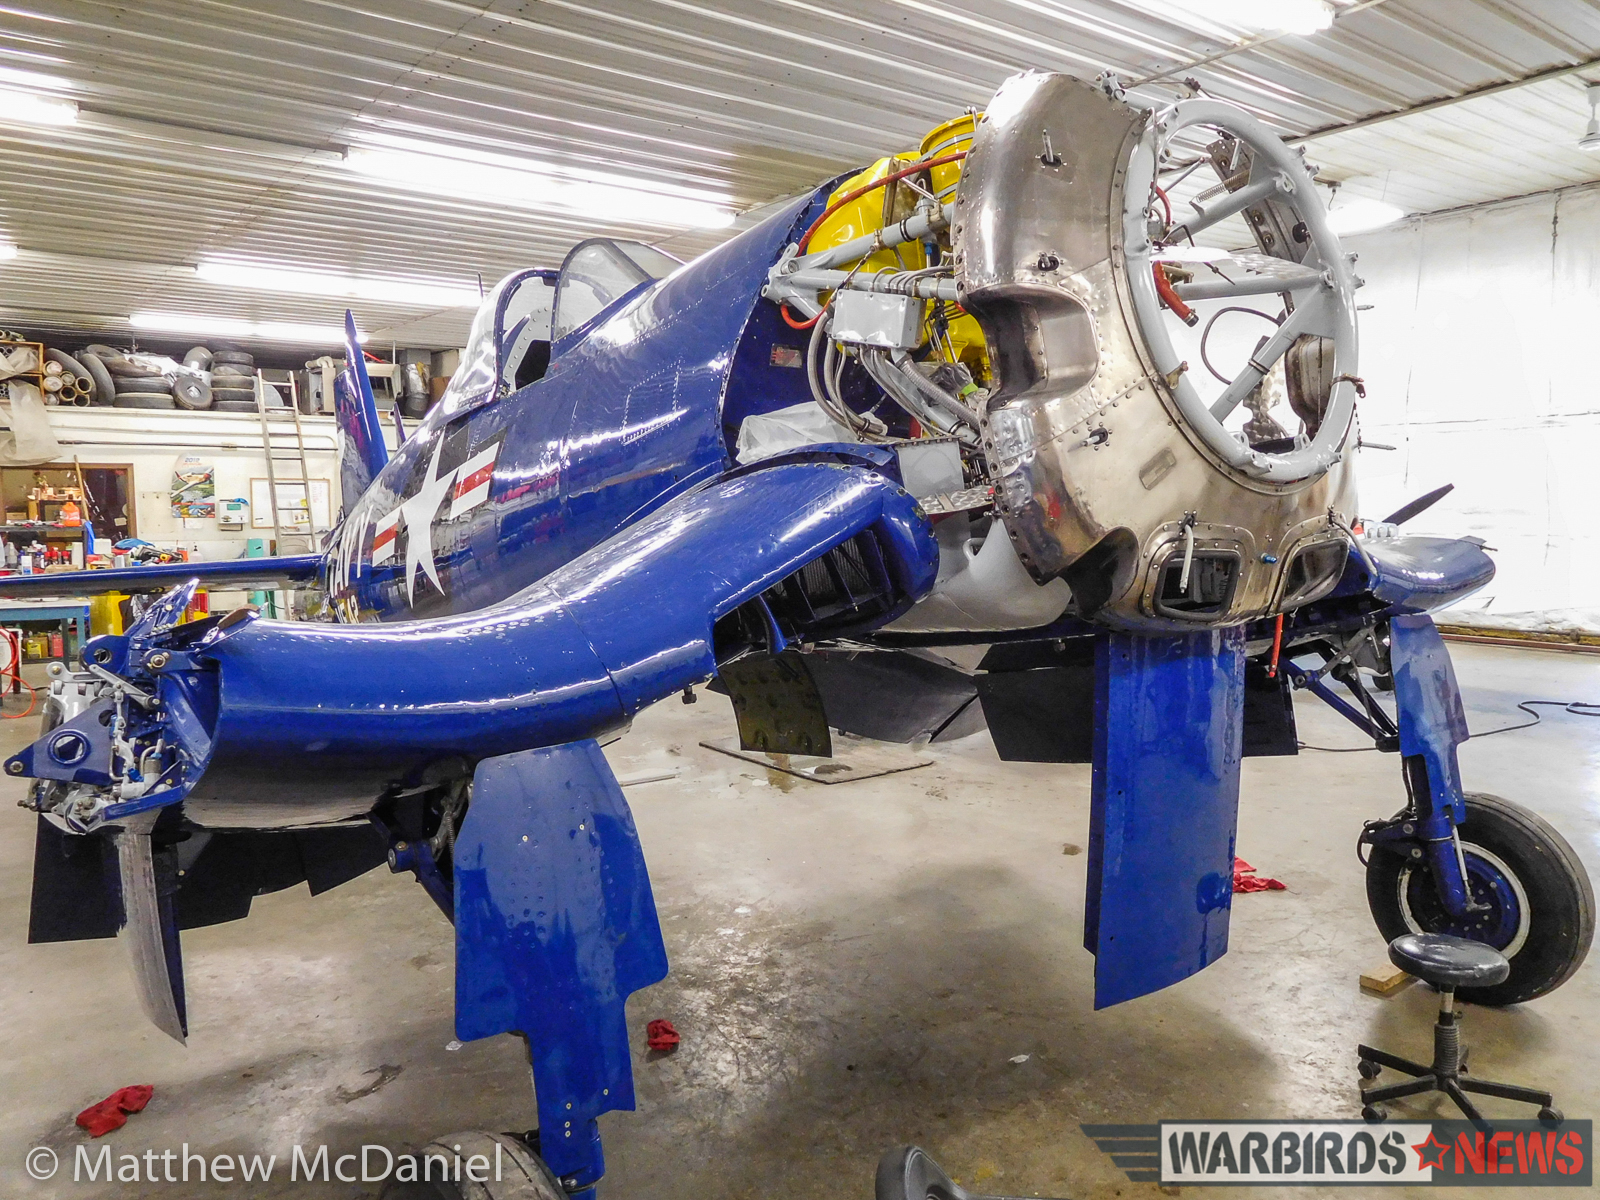 While Corsair 97388 looks sad without its wings or engine, the work being done is just a touch-up to refresh the extensive restoration originally completed by Gerry Beck 18 years ago. All systems and components are being thoroughly checked for its return to regular flight status. It will be reunited with its wings, engine, and control surfaces very soon. (photo by Matthew McDaniel)